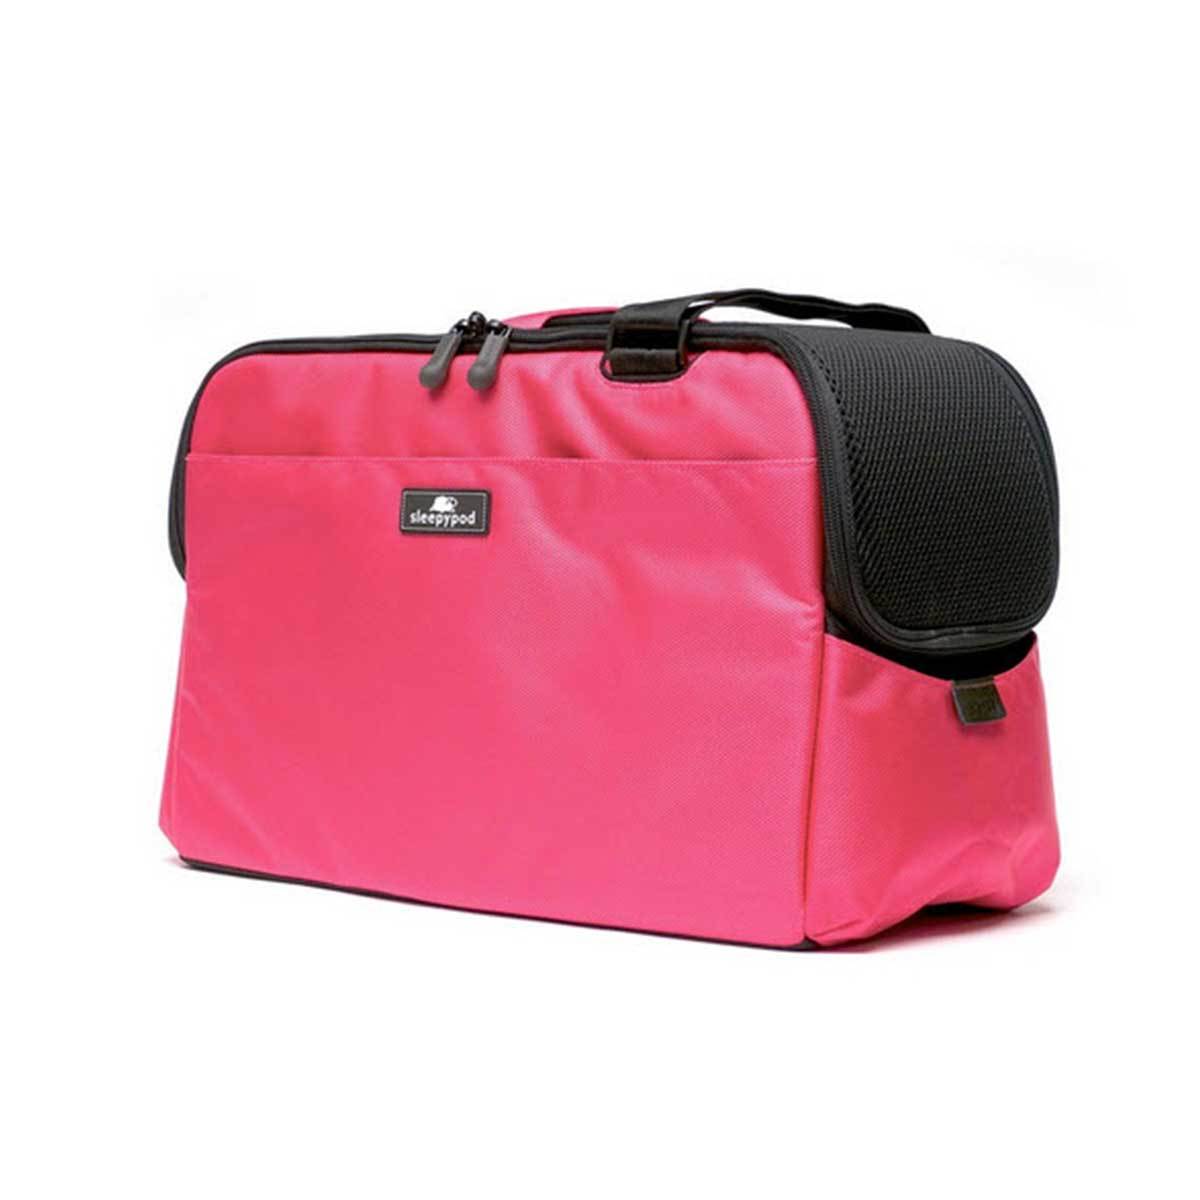 Sleepypod Atom Pet Carrier in Blossom Pink | Pawlicious & Company